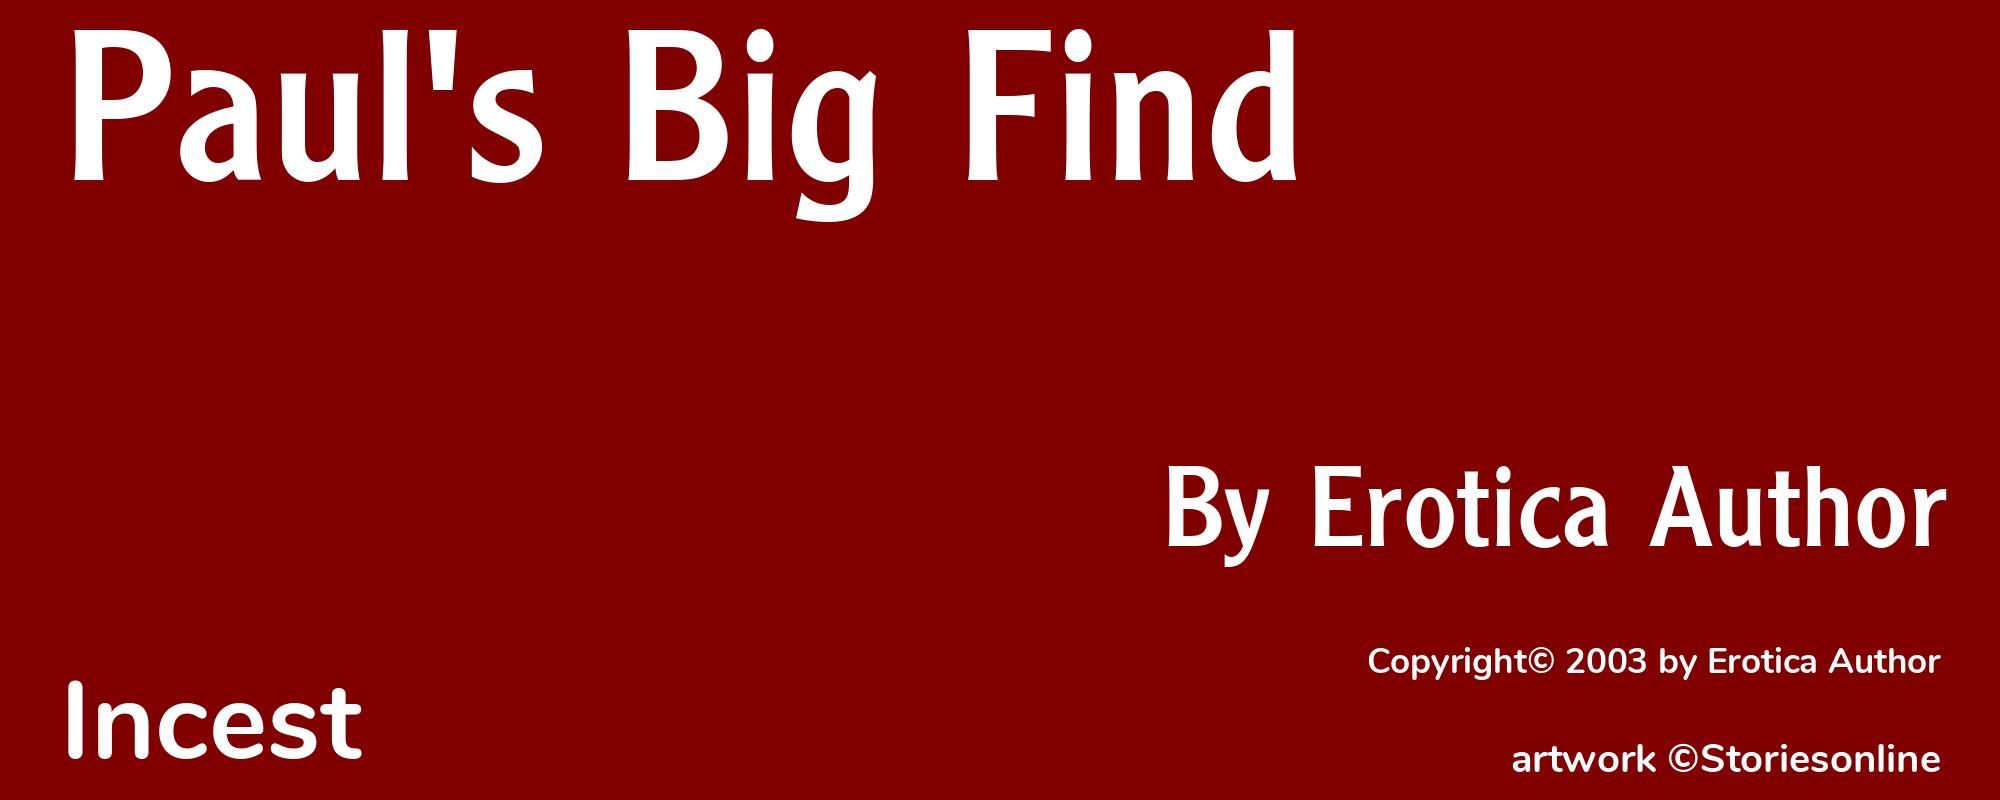 Paul's Big Find - Cover